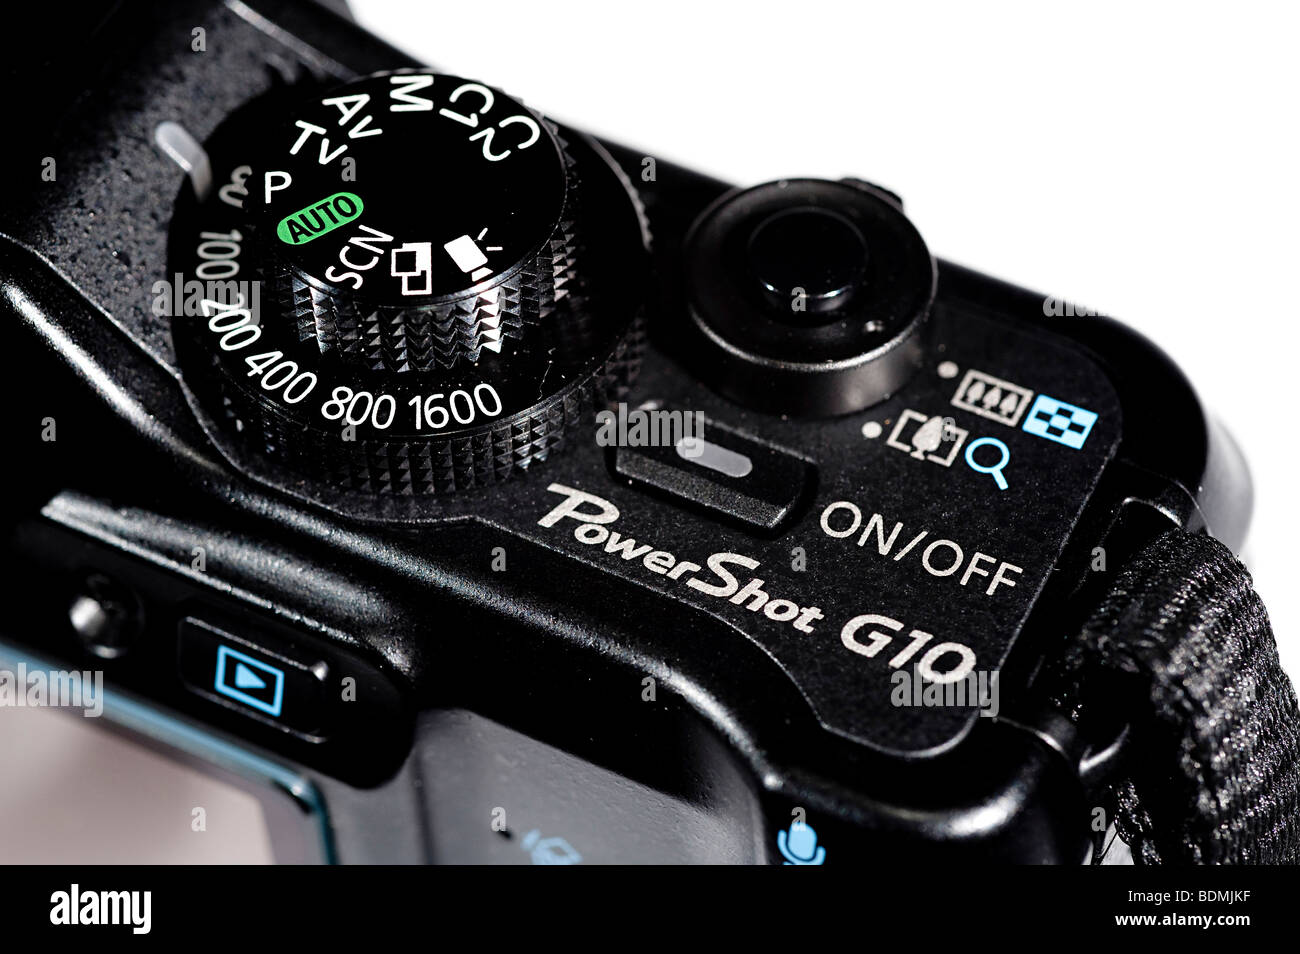 Detail of camera controls, including, manual, shutter, aperture and video modes Stock Photo